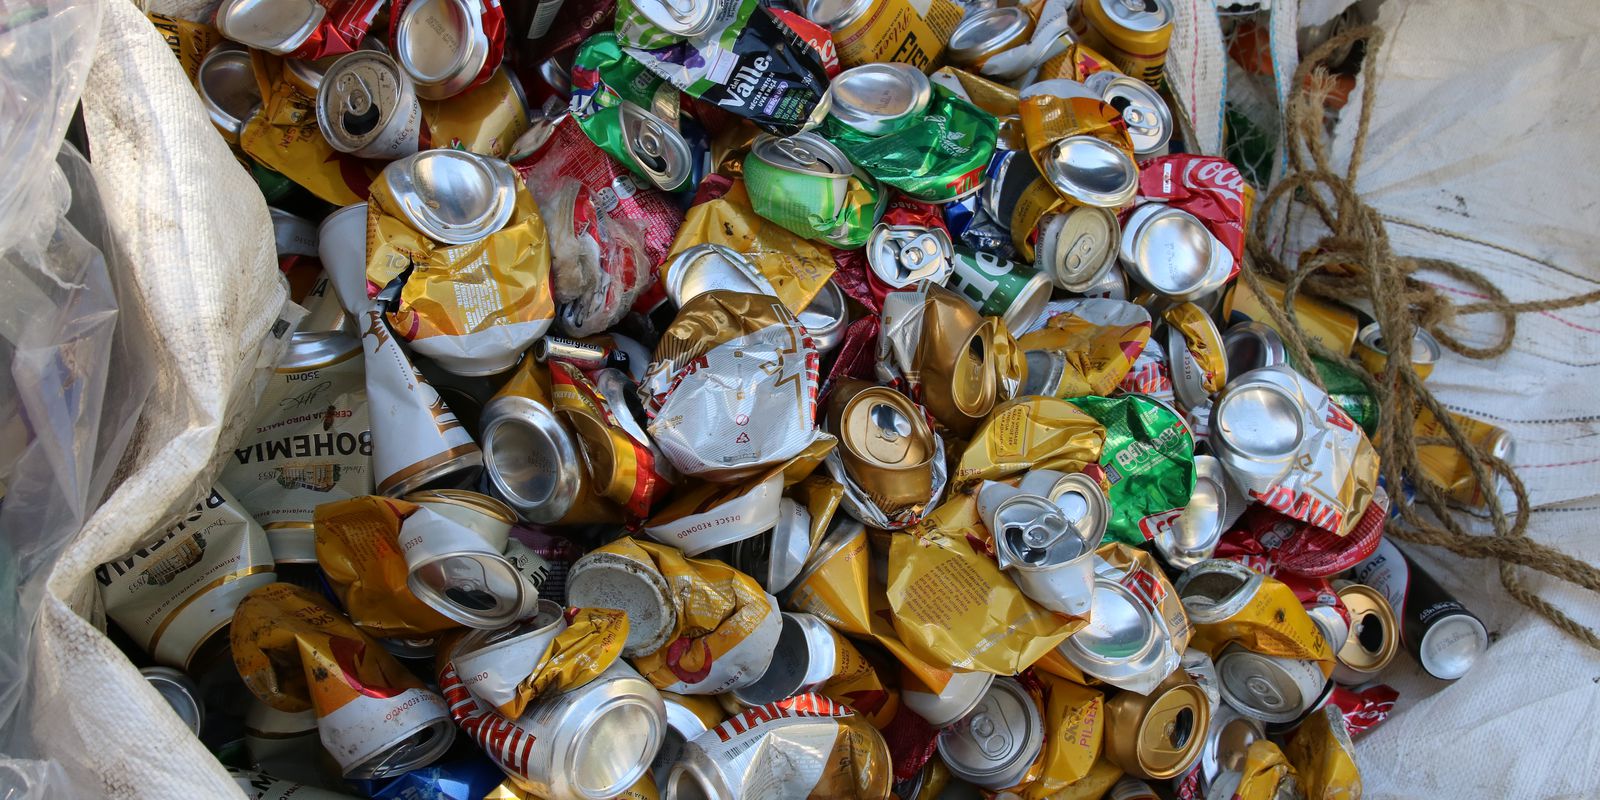 Brazil records 98.7% recycling of aluminum cans in 2021